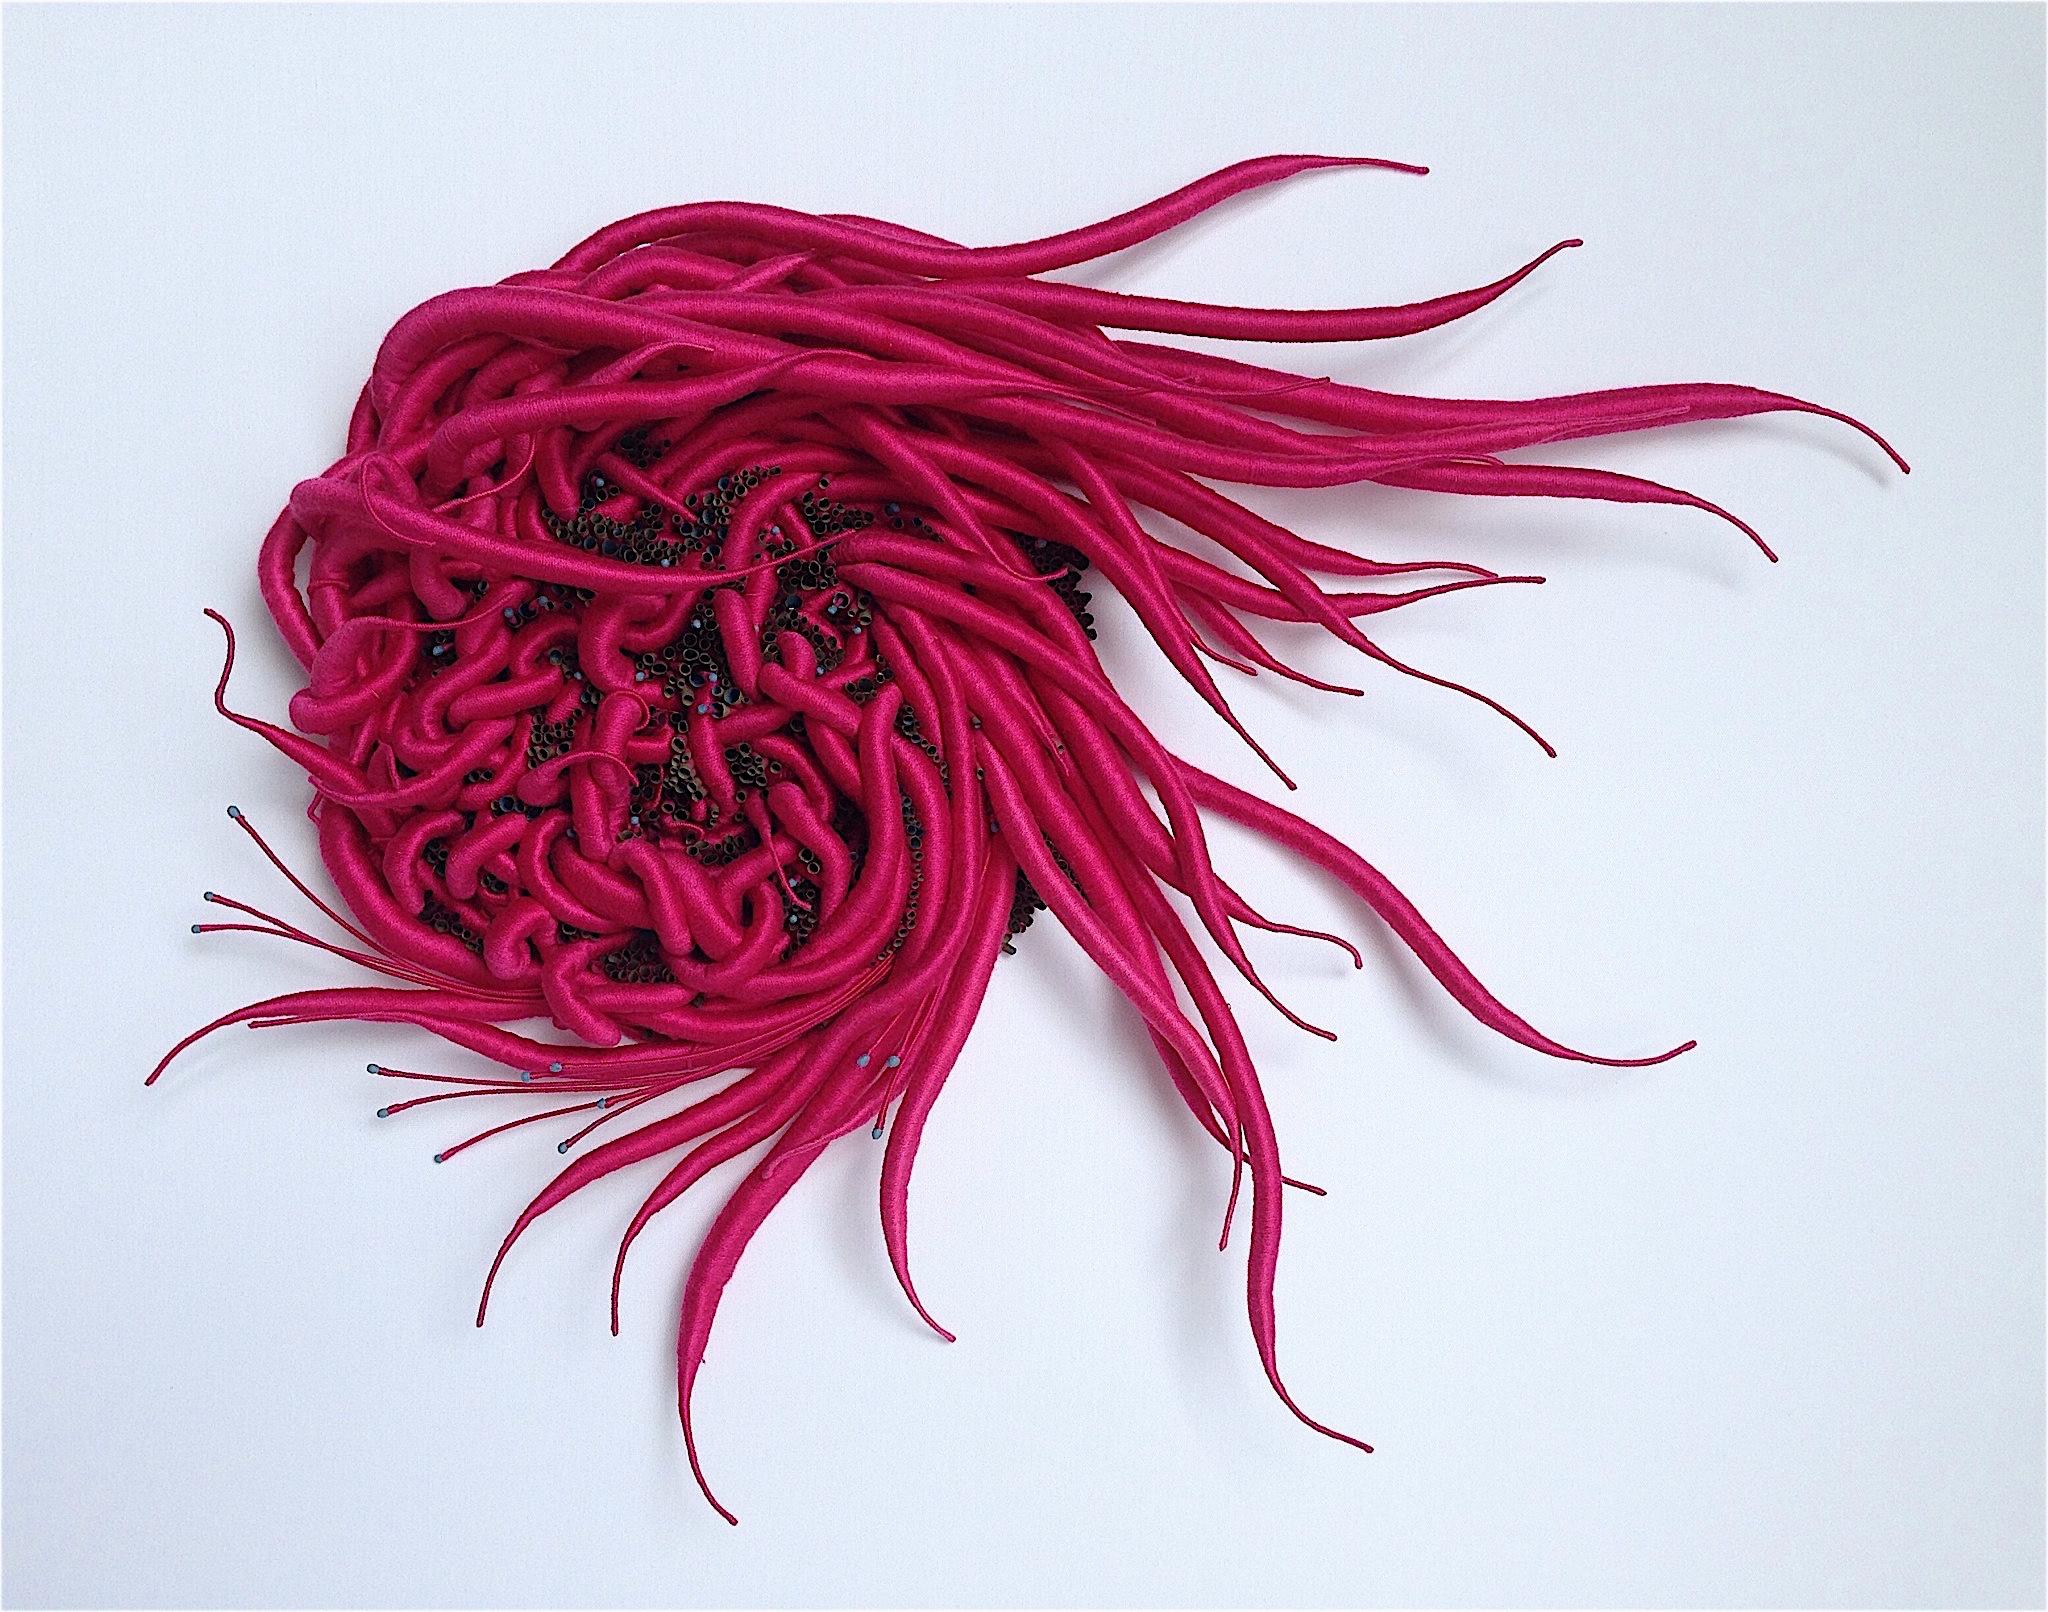 Catherine Latson Abstract Sculpture - Specimen 8, Framed Burgundy Red Nature Inspired Hand-dyed Thread Fiber Sculpture